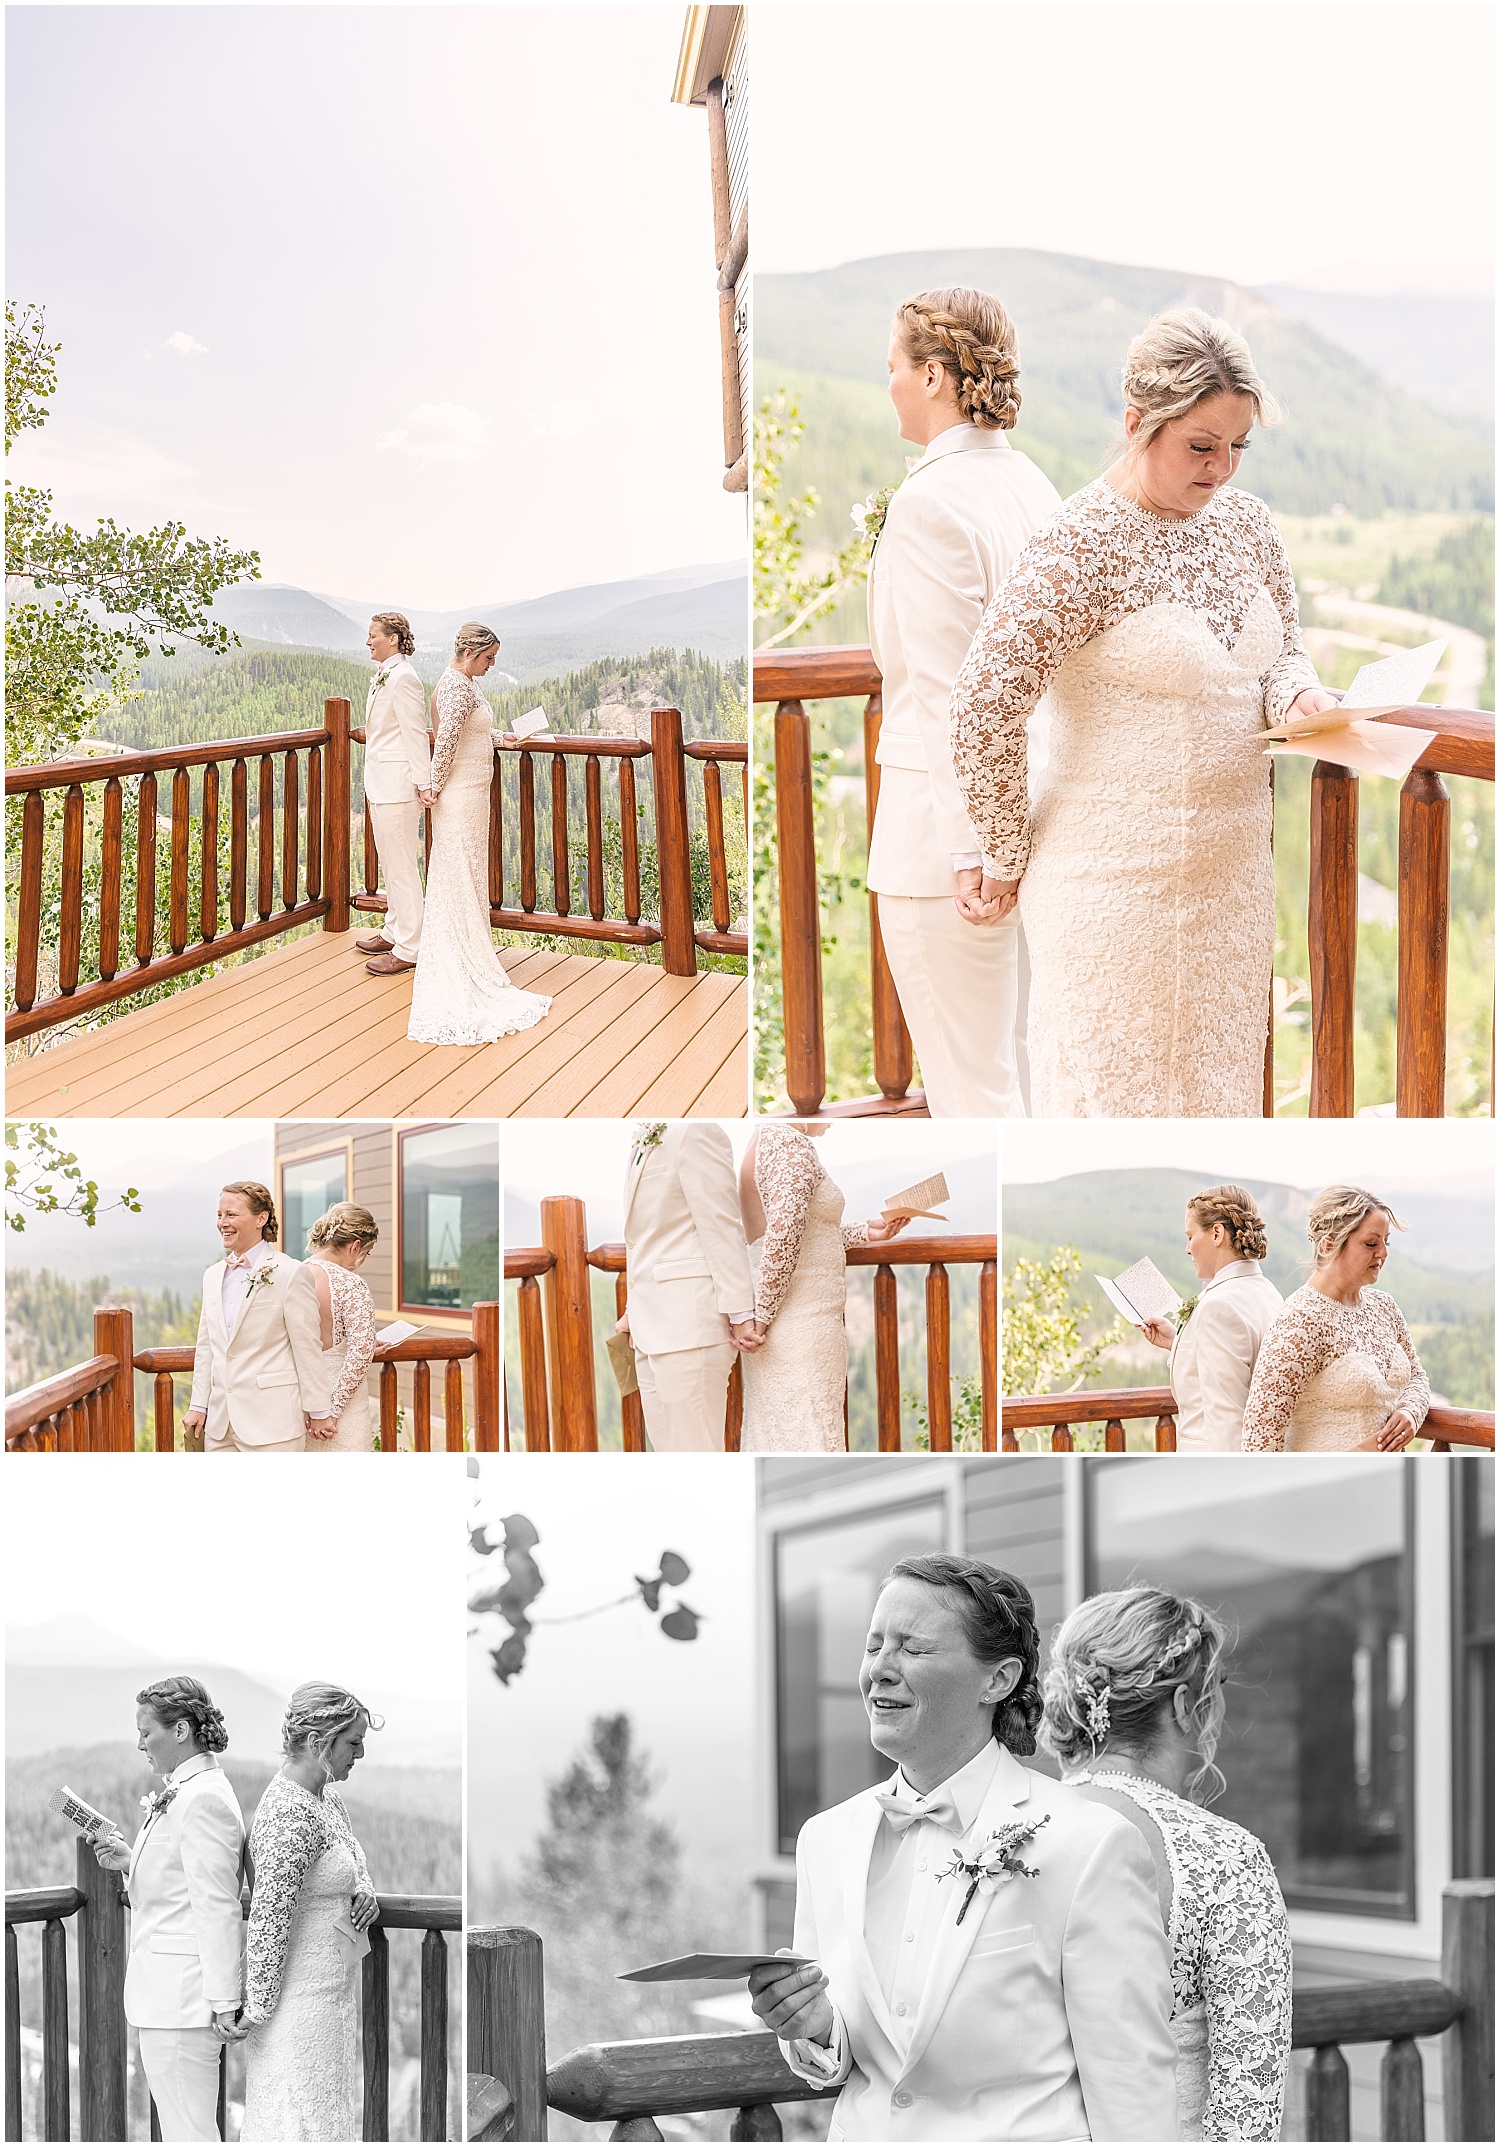 Two brides read their vows to each other back to back before wedding ceremony at the Lodge at Breckenridge